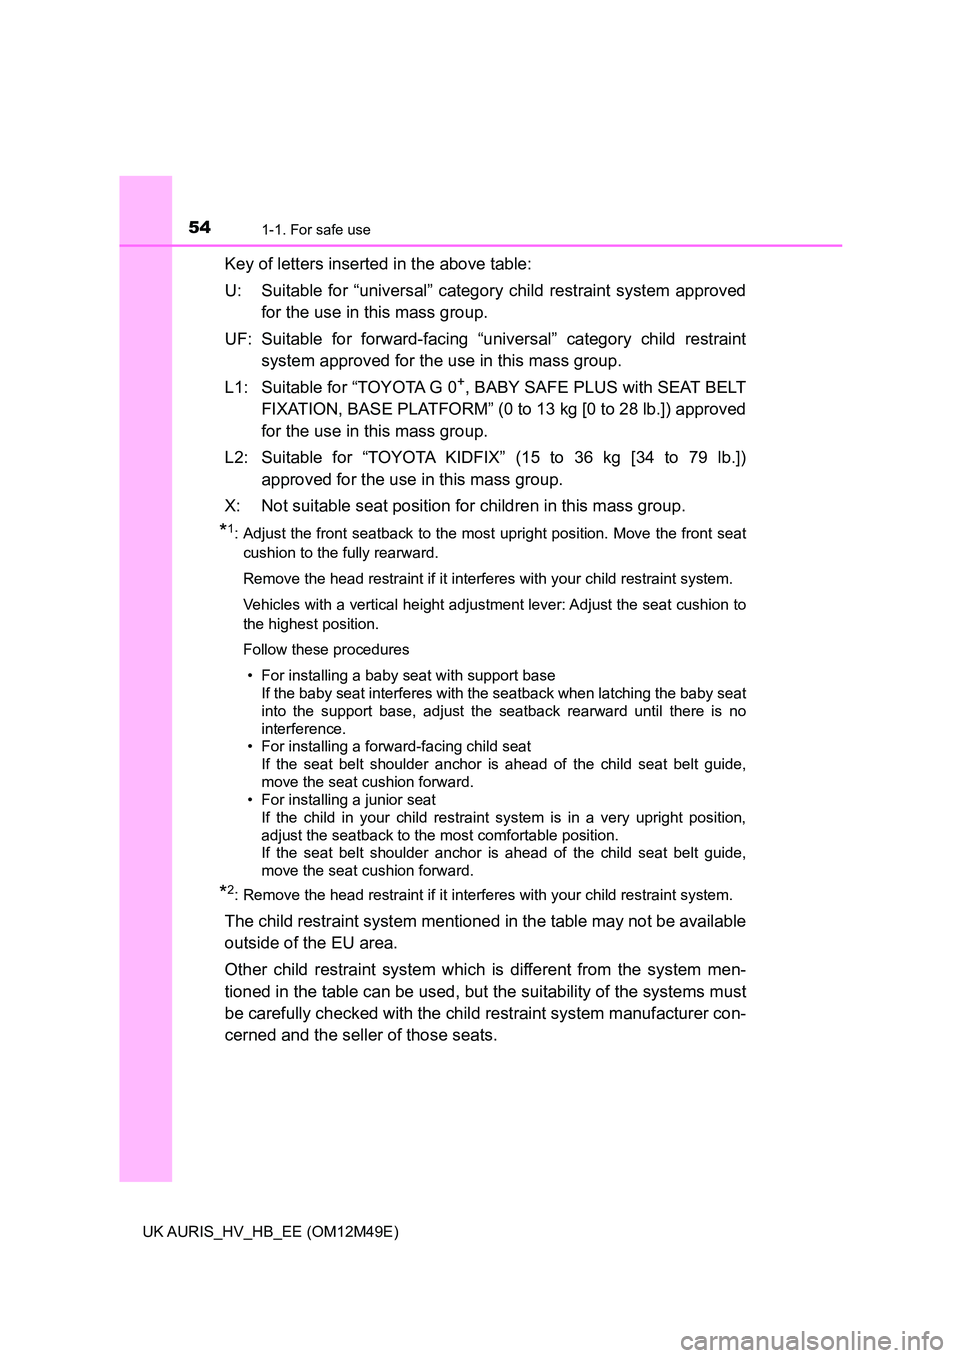 TOYOTA AURIS 2018  Owners Manual (in English) 541-1. For safe use
UK AURIS_HV_HB_EE (OM12M49E)
Key of letters inserted in the above table: 
U: Suitable for “universal” category child restraint system approved 
for the use in this mass group. 